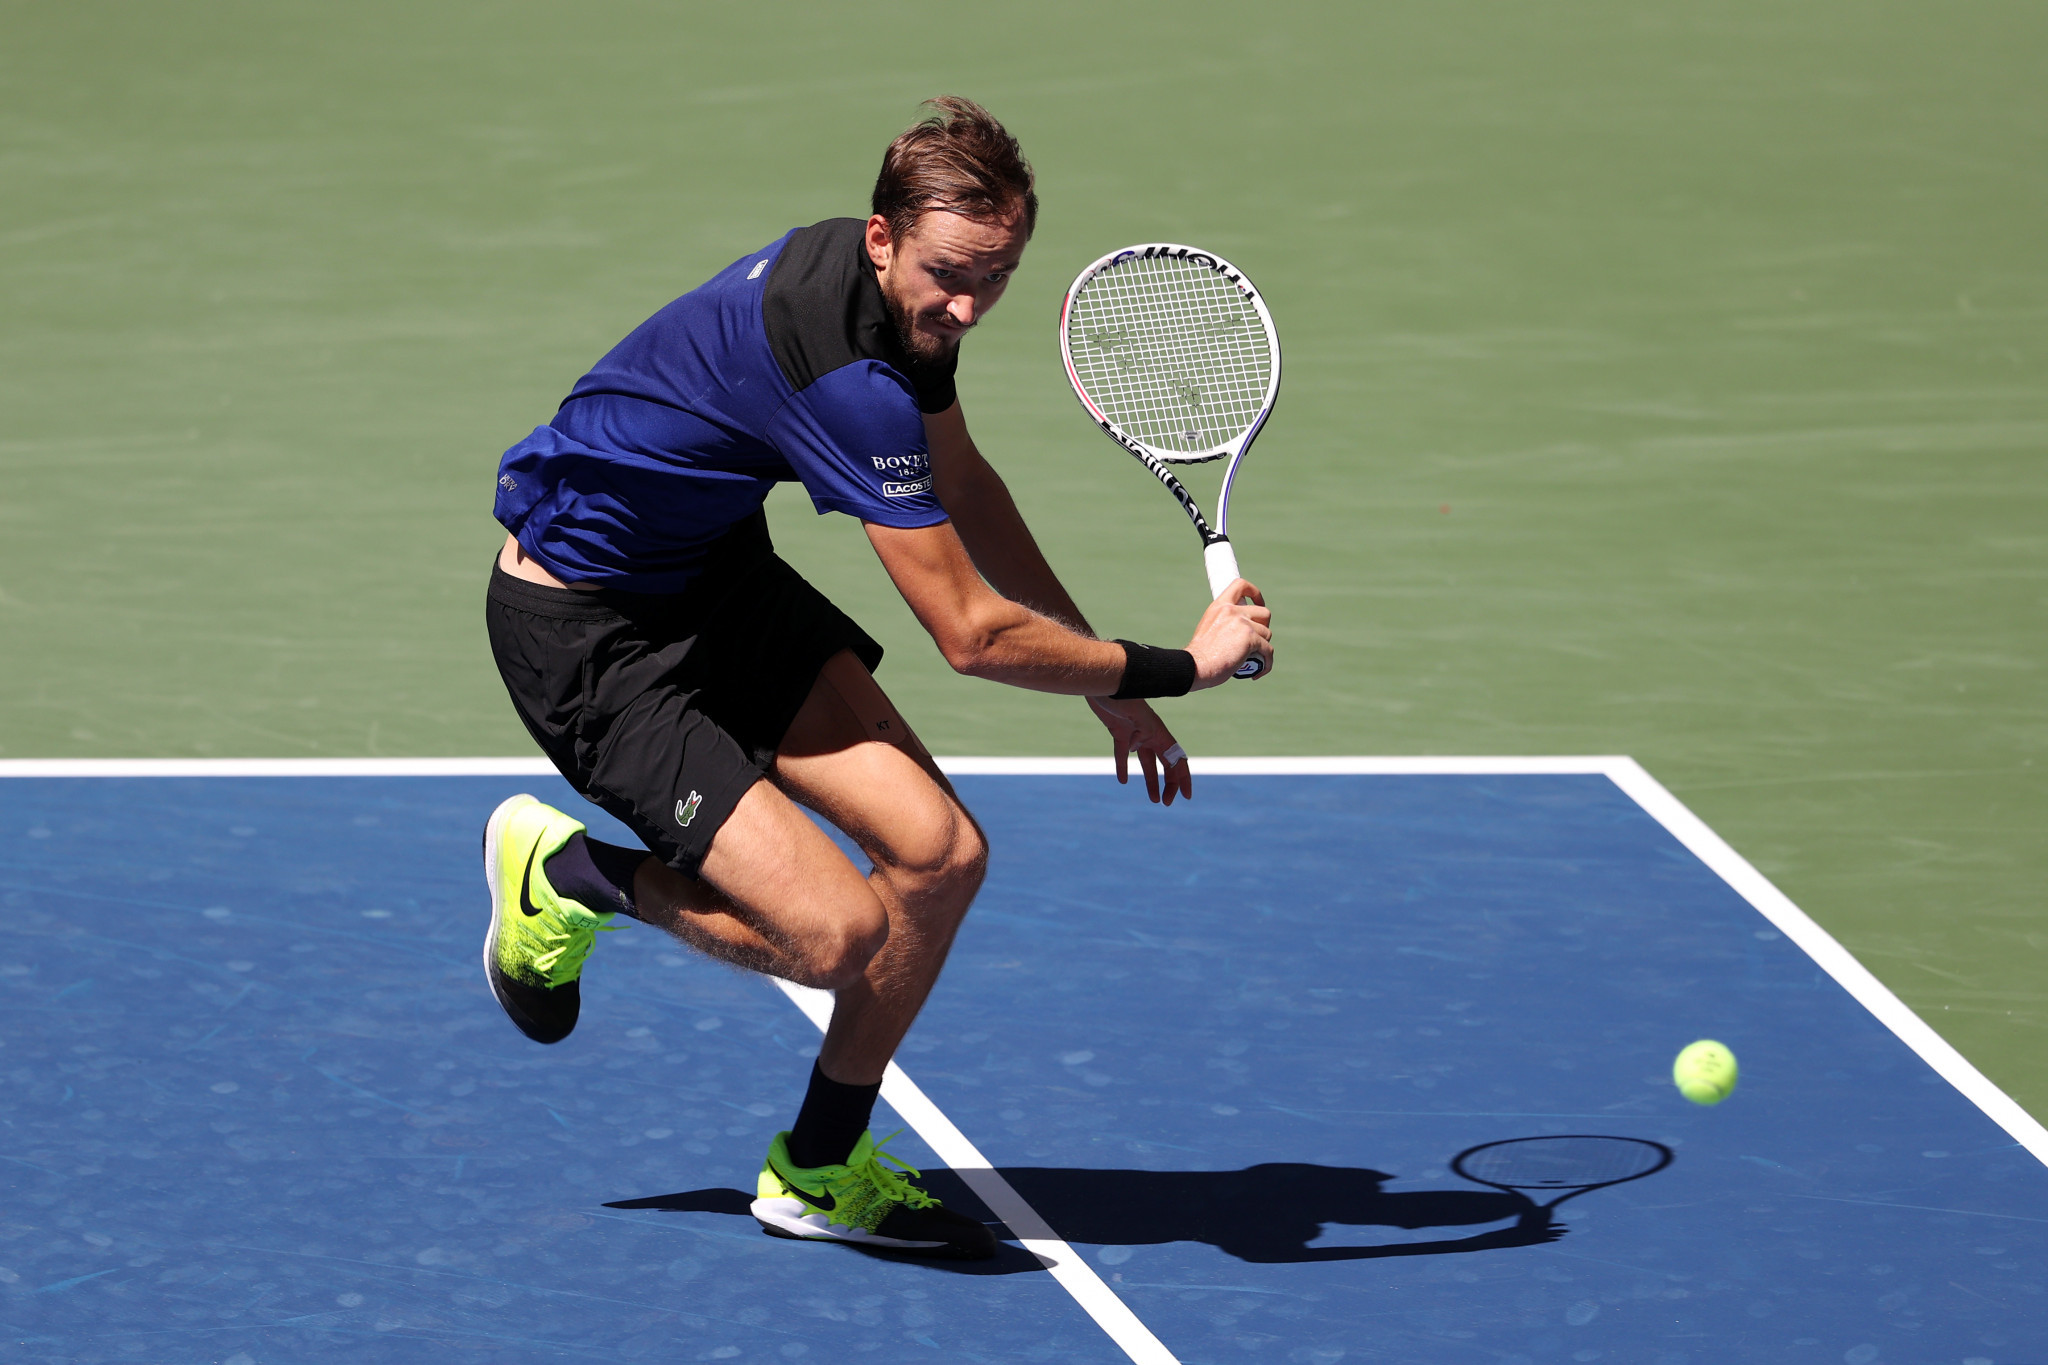 Russia's Daniil Medvedev, last year's US Open runner-up, has reached the last 16 without dropping a set after beating America's JJ Wolf  6-3, 6-3, 6-3 today ©Getty Images